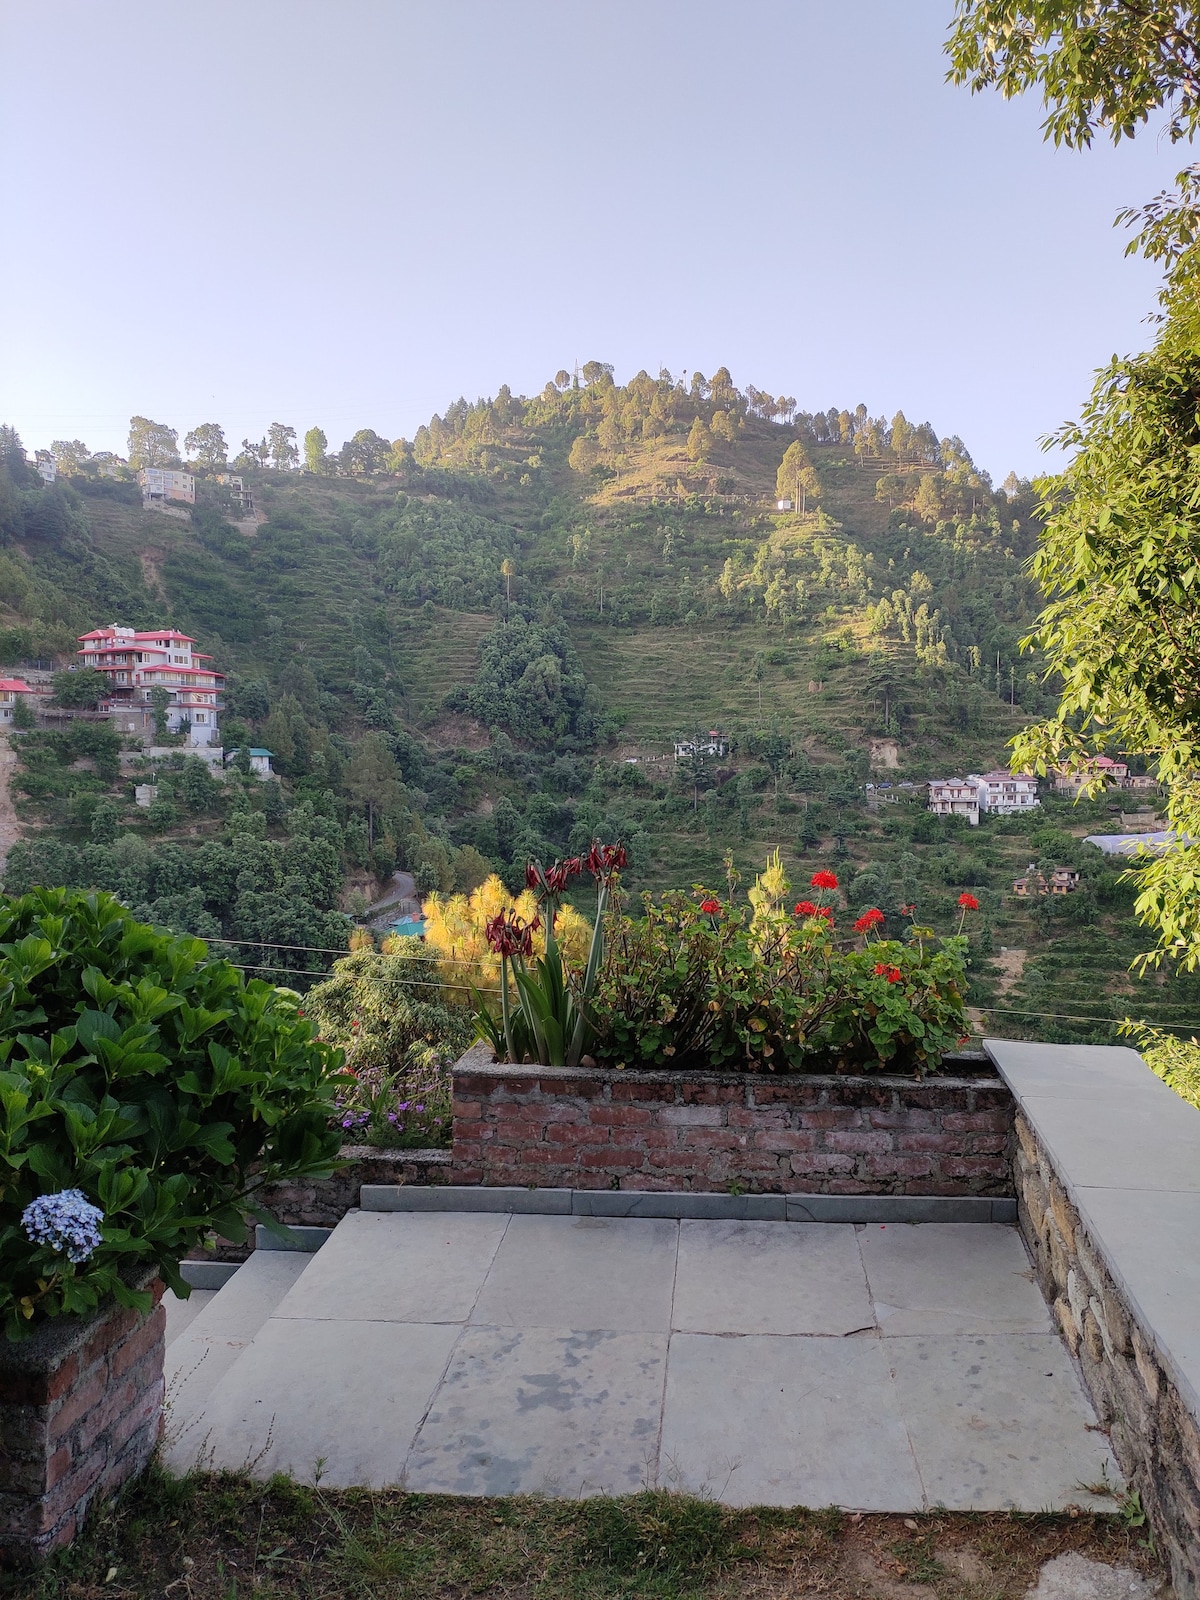 Dhoop Ghar: A sun kissed cottage in the hills.